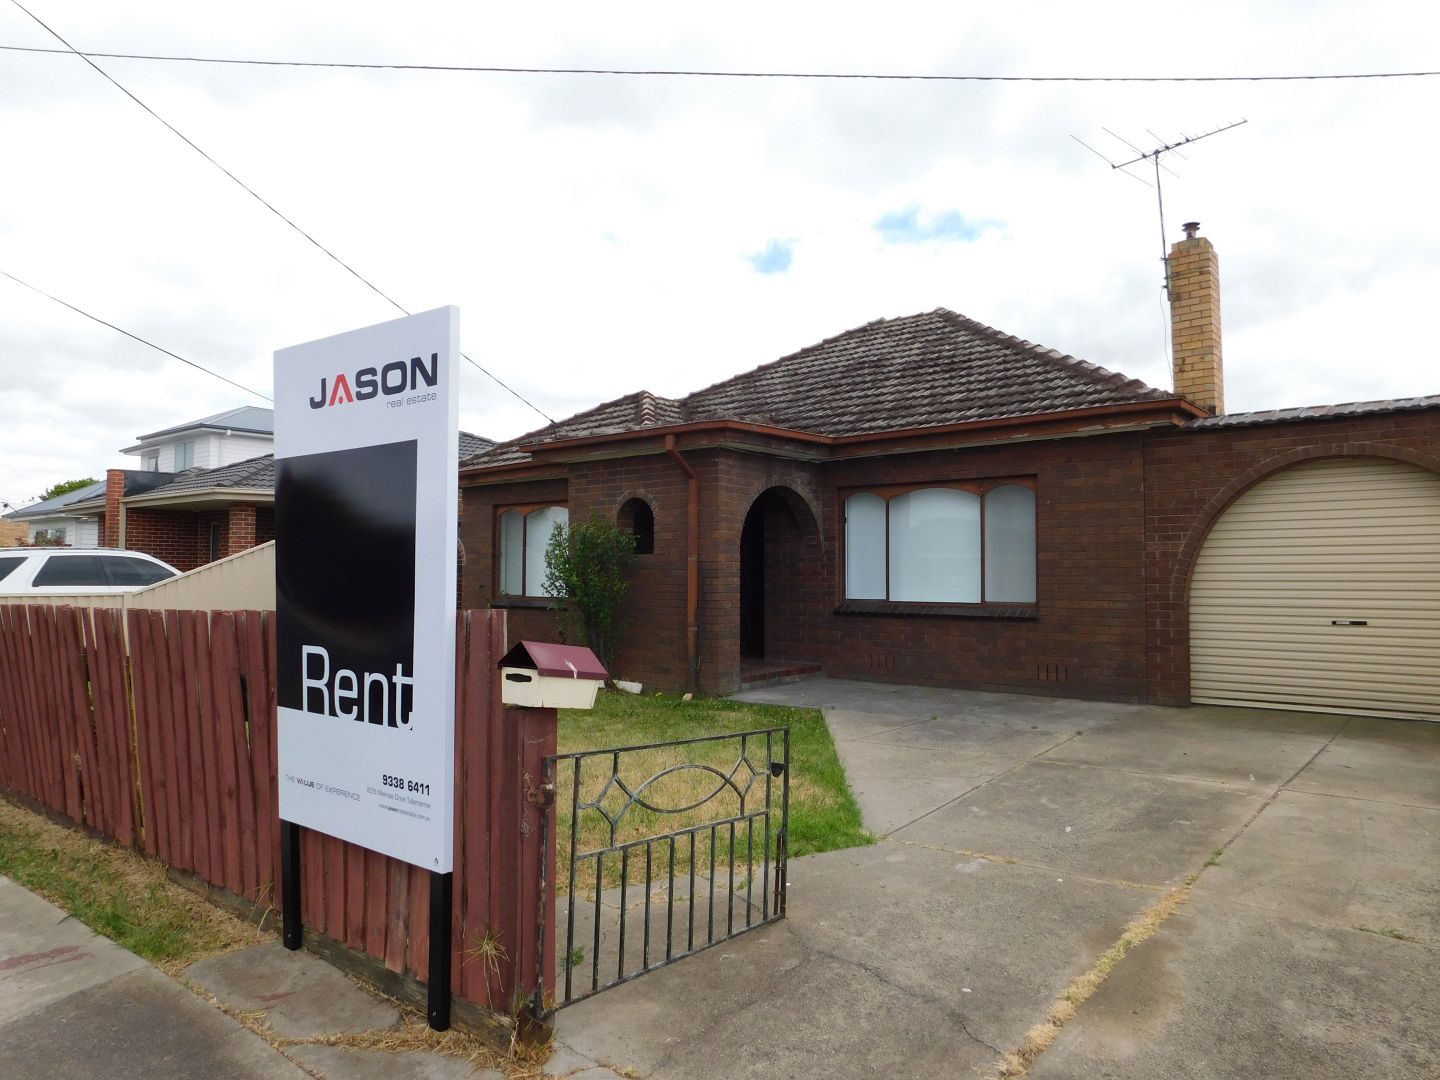 4 Cameron Street, Airport West VIC 3042